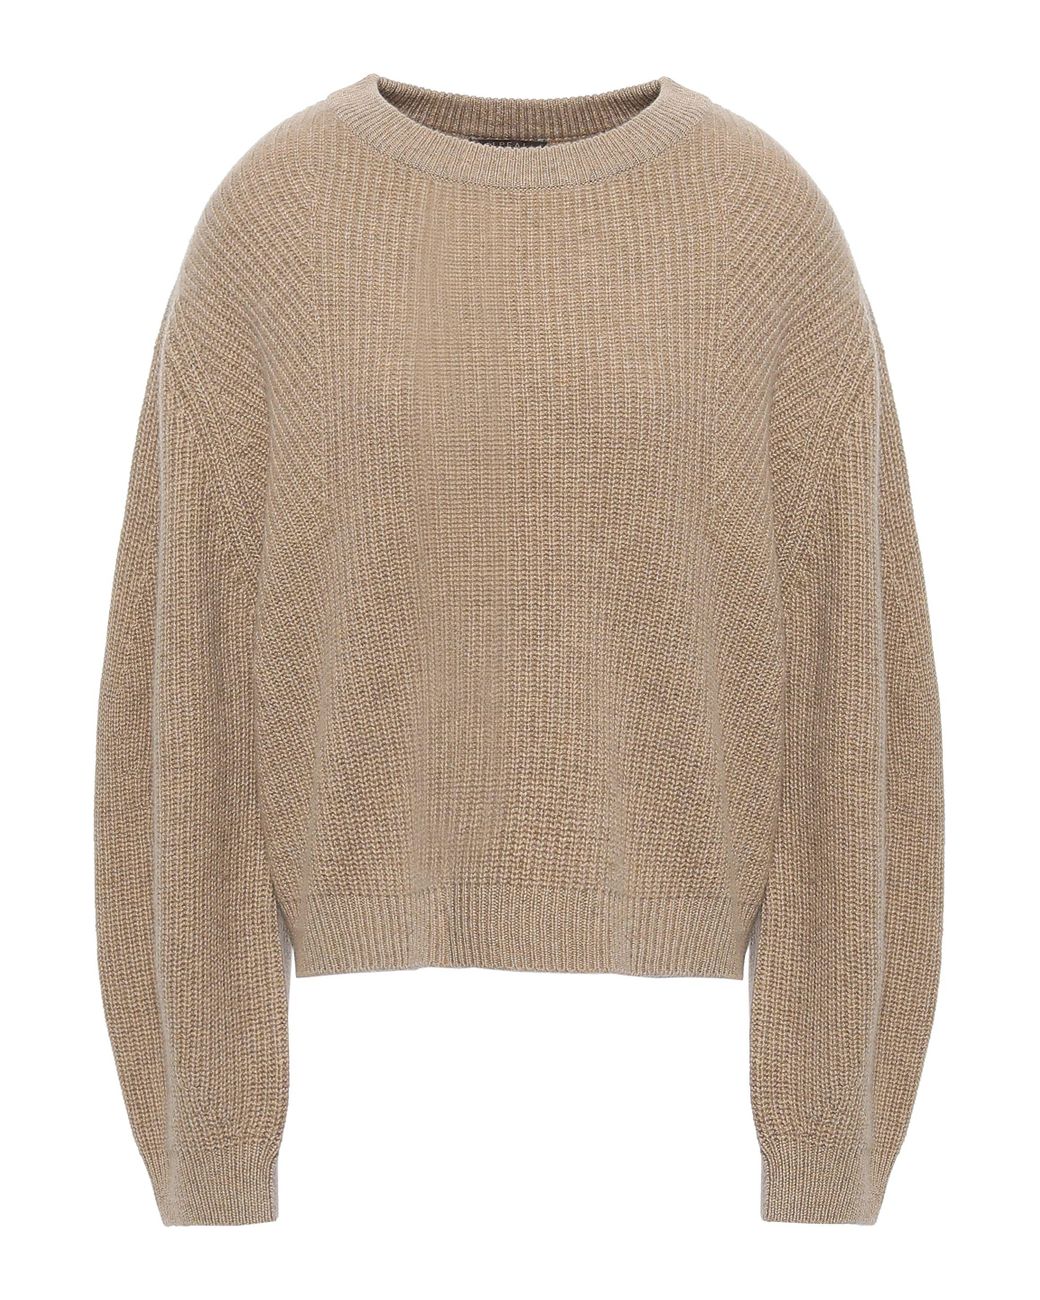 N.Peal Cashmere Ribbed Cashmere Sweater Sand - Lyst